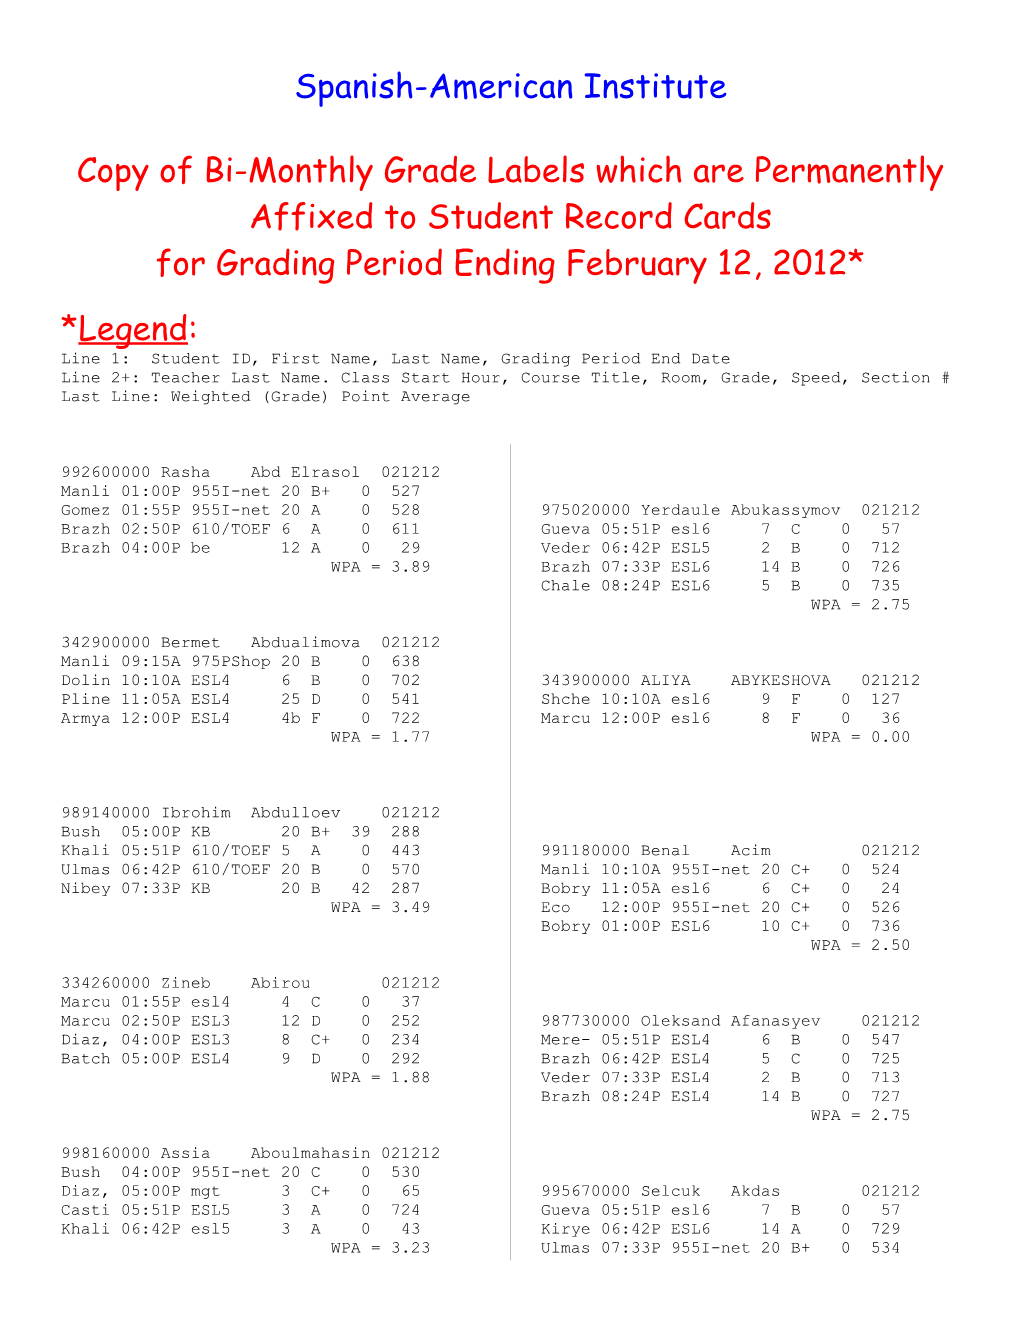 Copy of Grade Labels Permanently Affixes to Student Record Cards for Bi-Montlly Grading